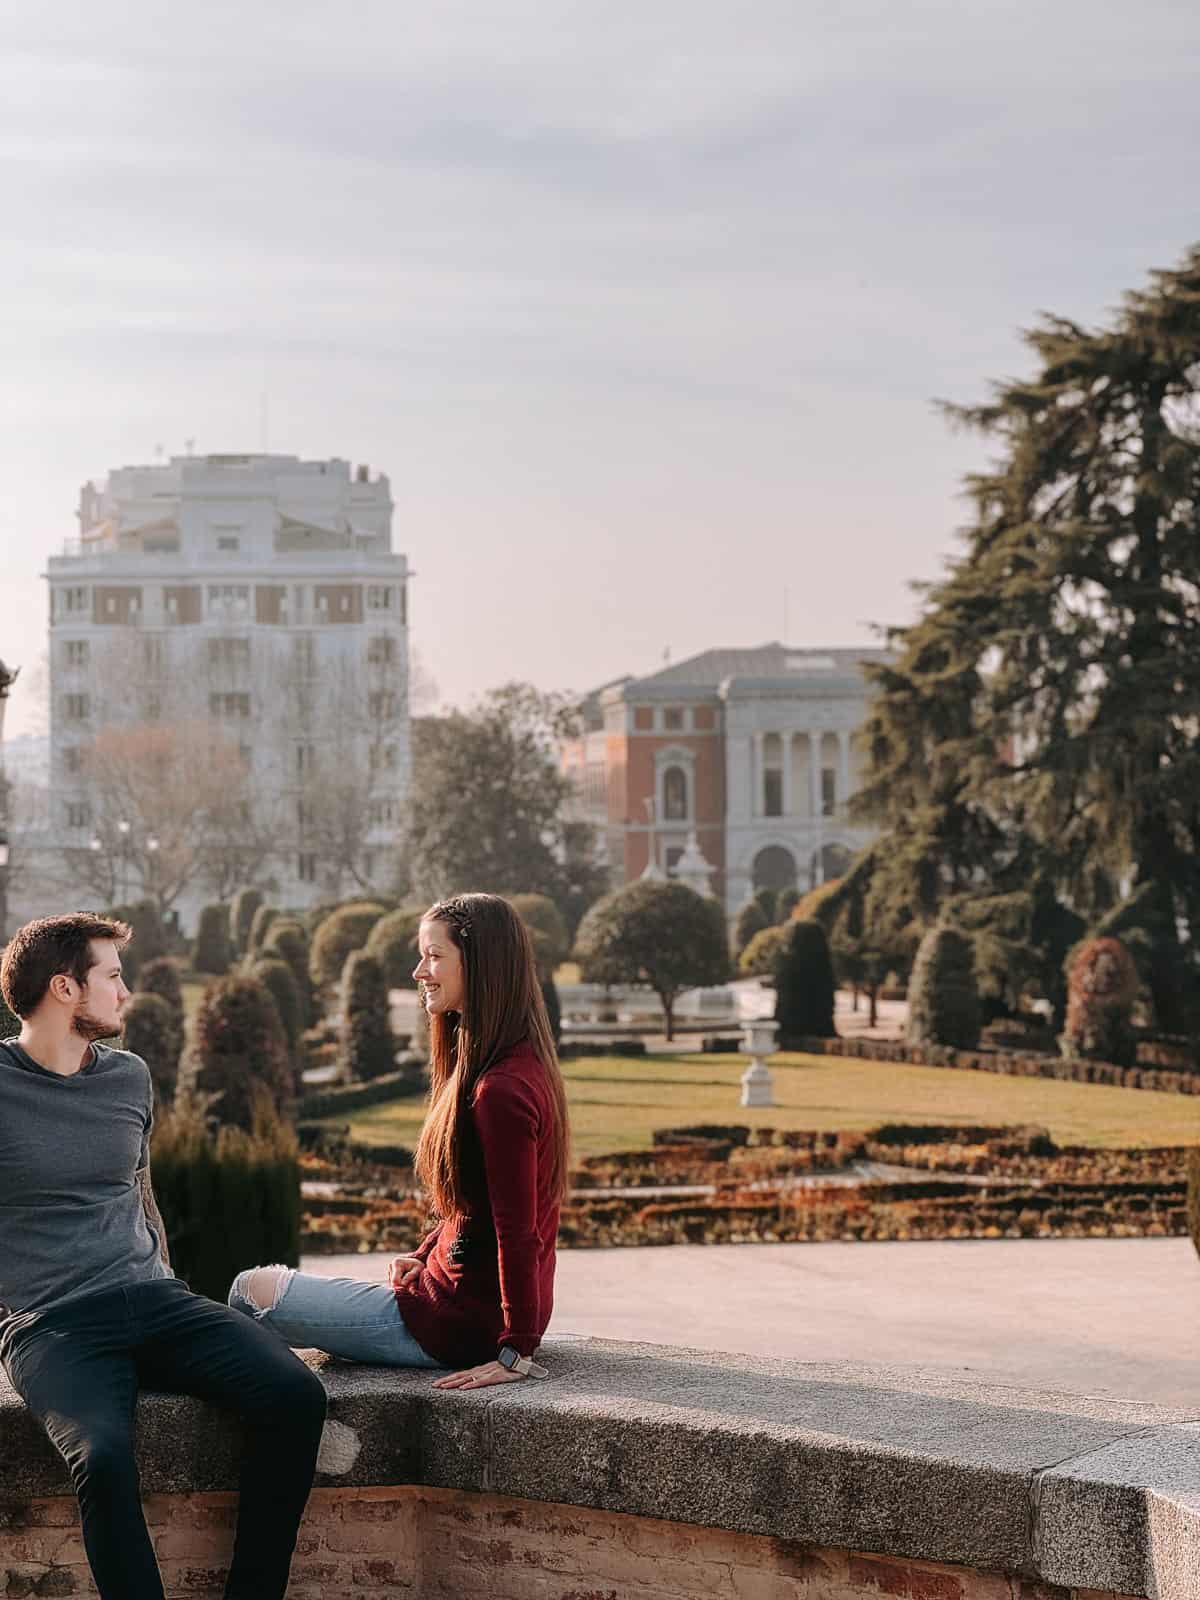 A man and a woman sit facing each other on a stone wall, engaging in a casual conversation with a serene, landscaped garden and classic European architecture in the background, all bathed in the soft glow of the afternoon sun